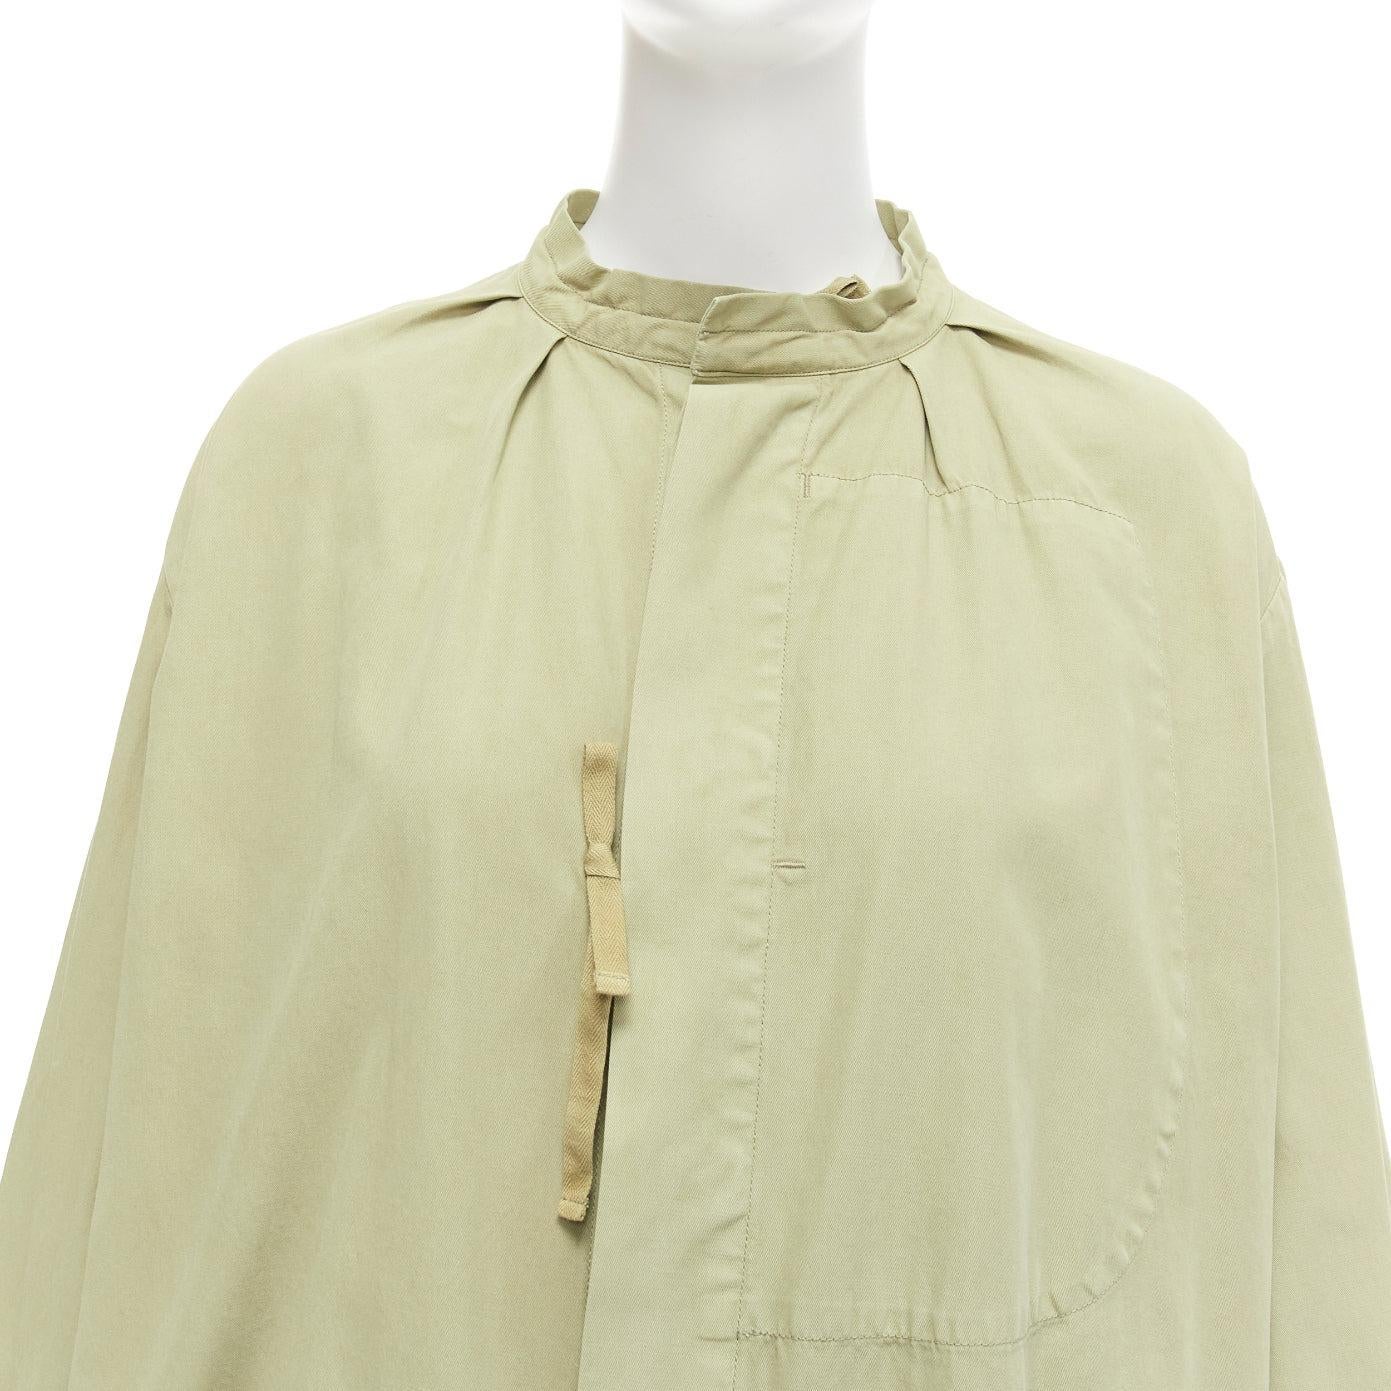 TICCA washed green 100% cotton tie collar centre parka jacket
Reference: JACG/A00128
Brand: Ticca
Material: Cotton
Color: Green
Pattern: Solid
Closure: Self Tie
Extra Details: Hidden buttons with self tie straps.
Made in: